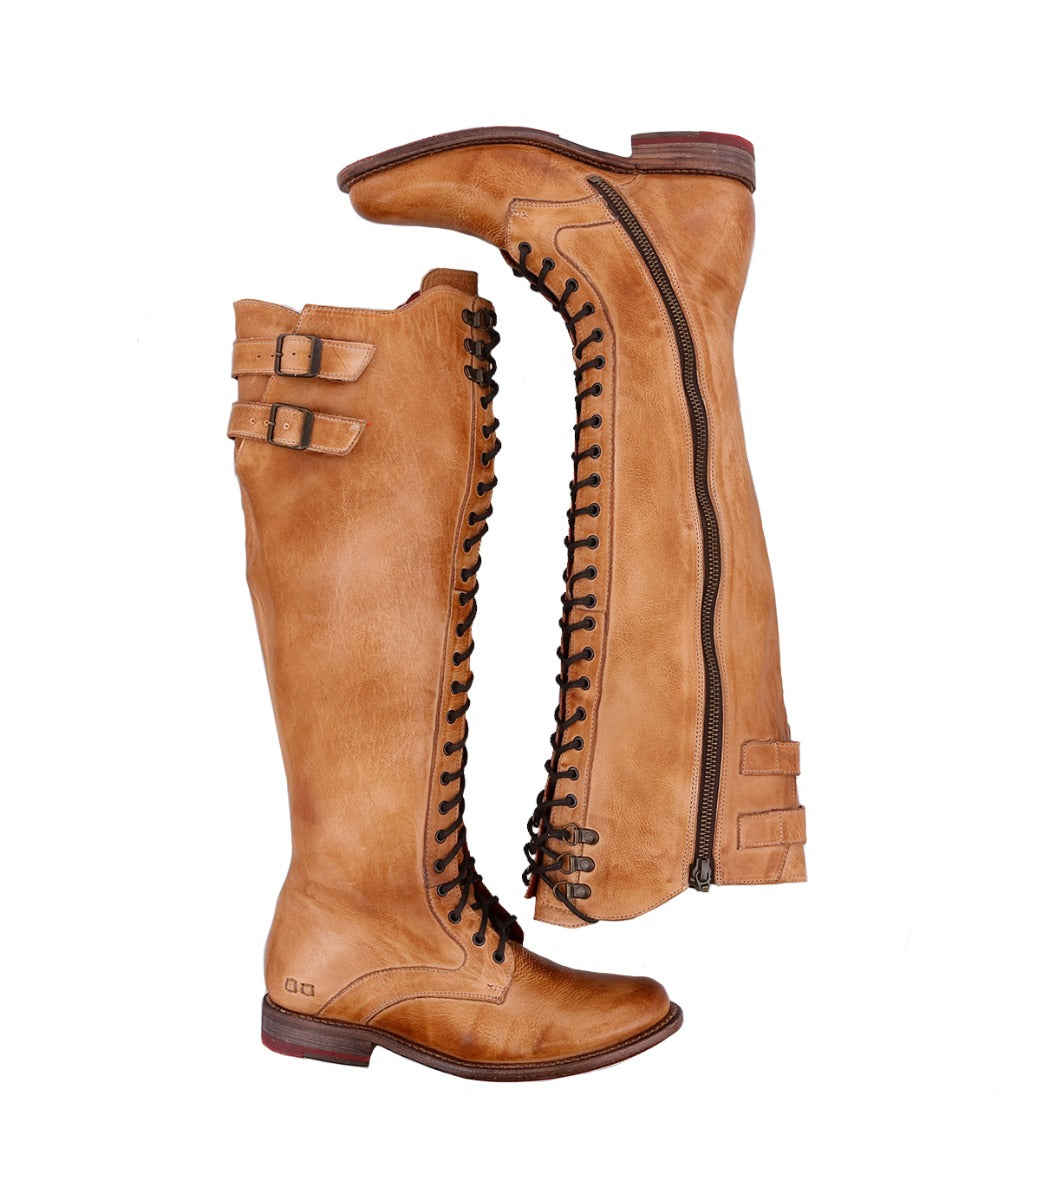 A pair of Bed Stu Della boots with buckles on the side.